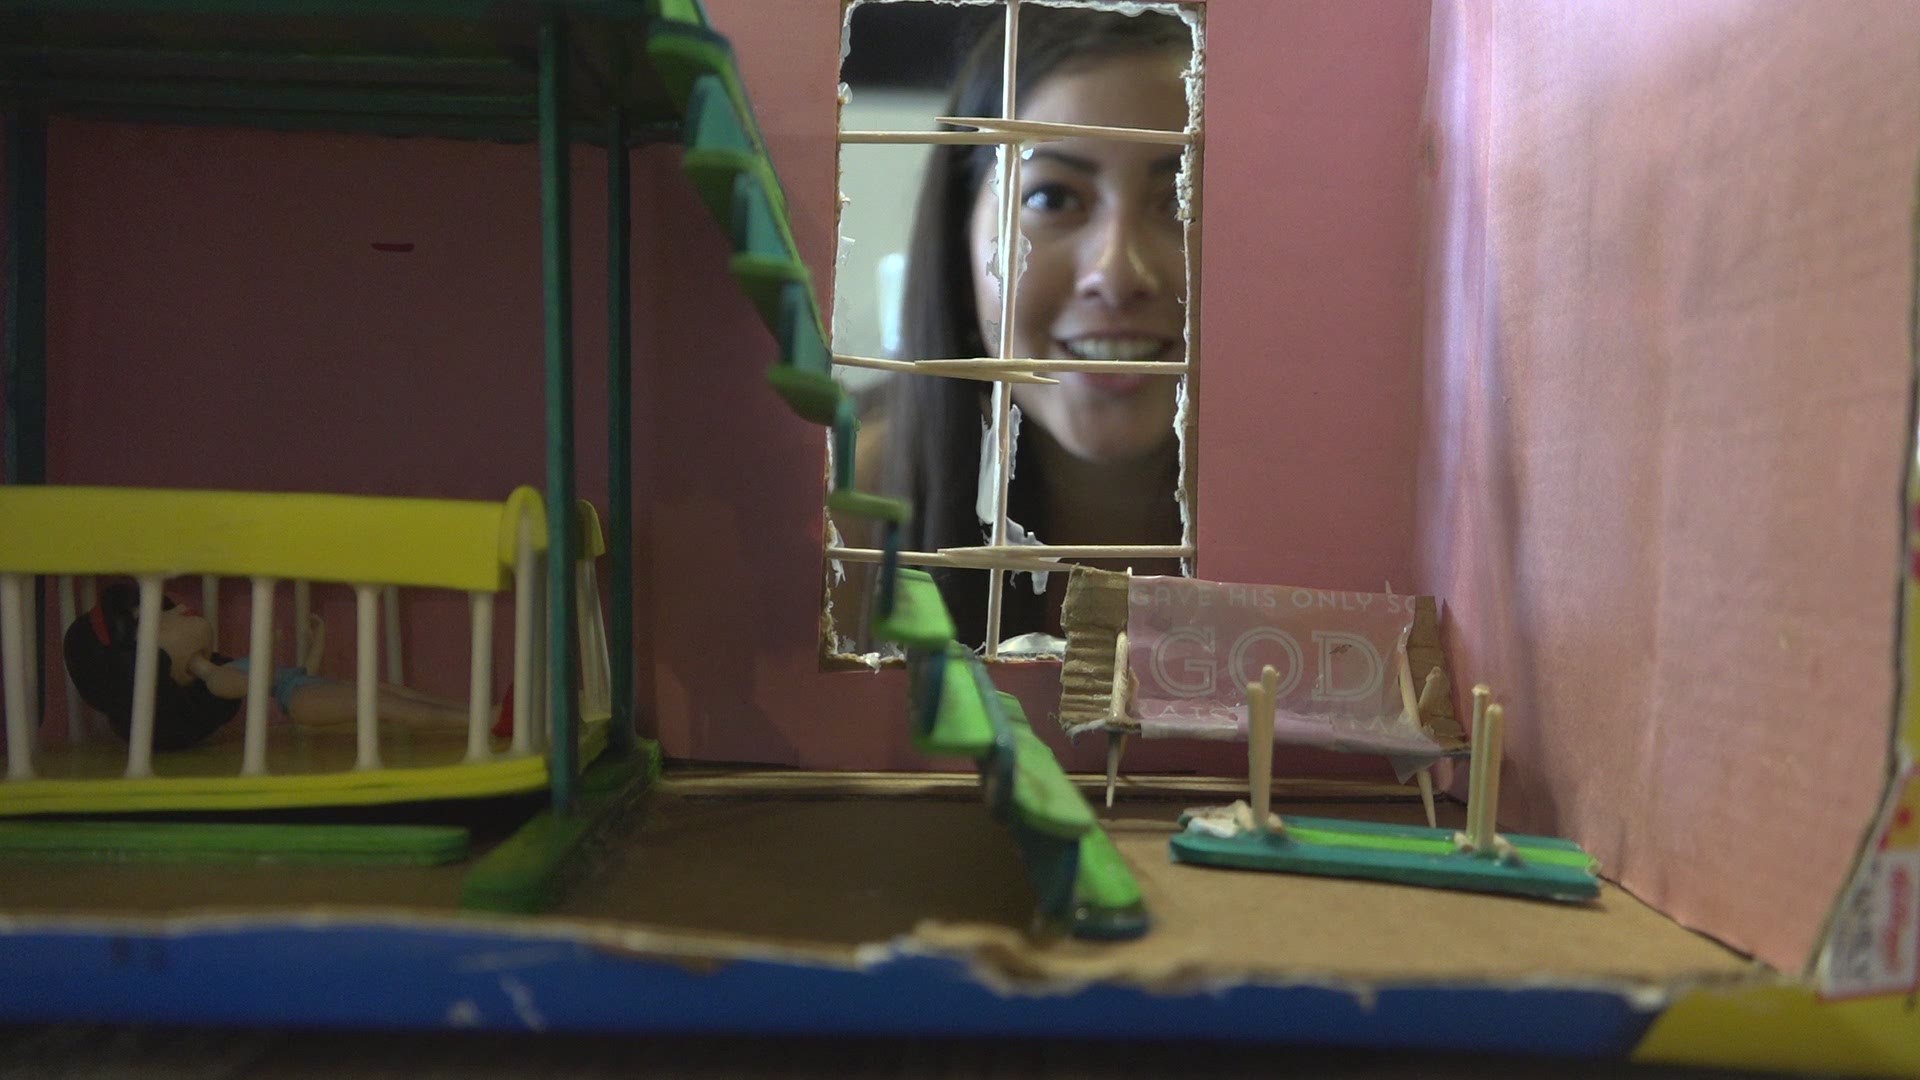 One Merkel woman makes doll houses out of recycling items.